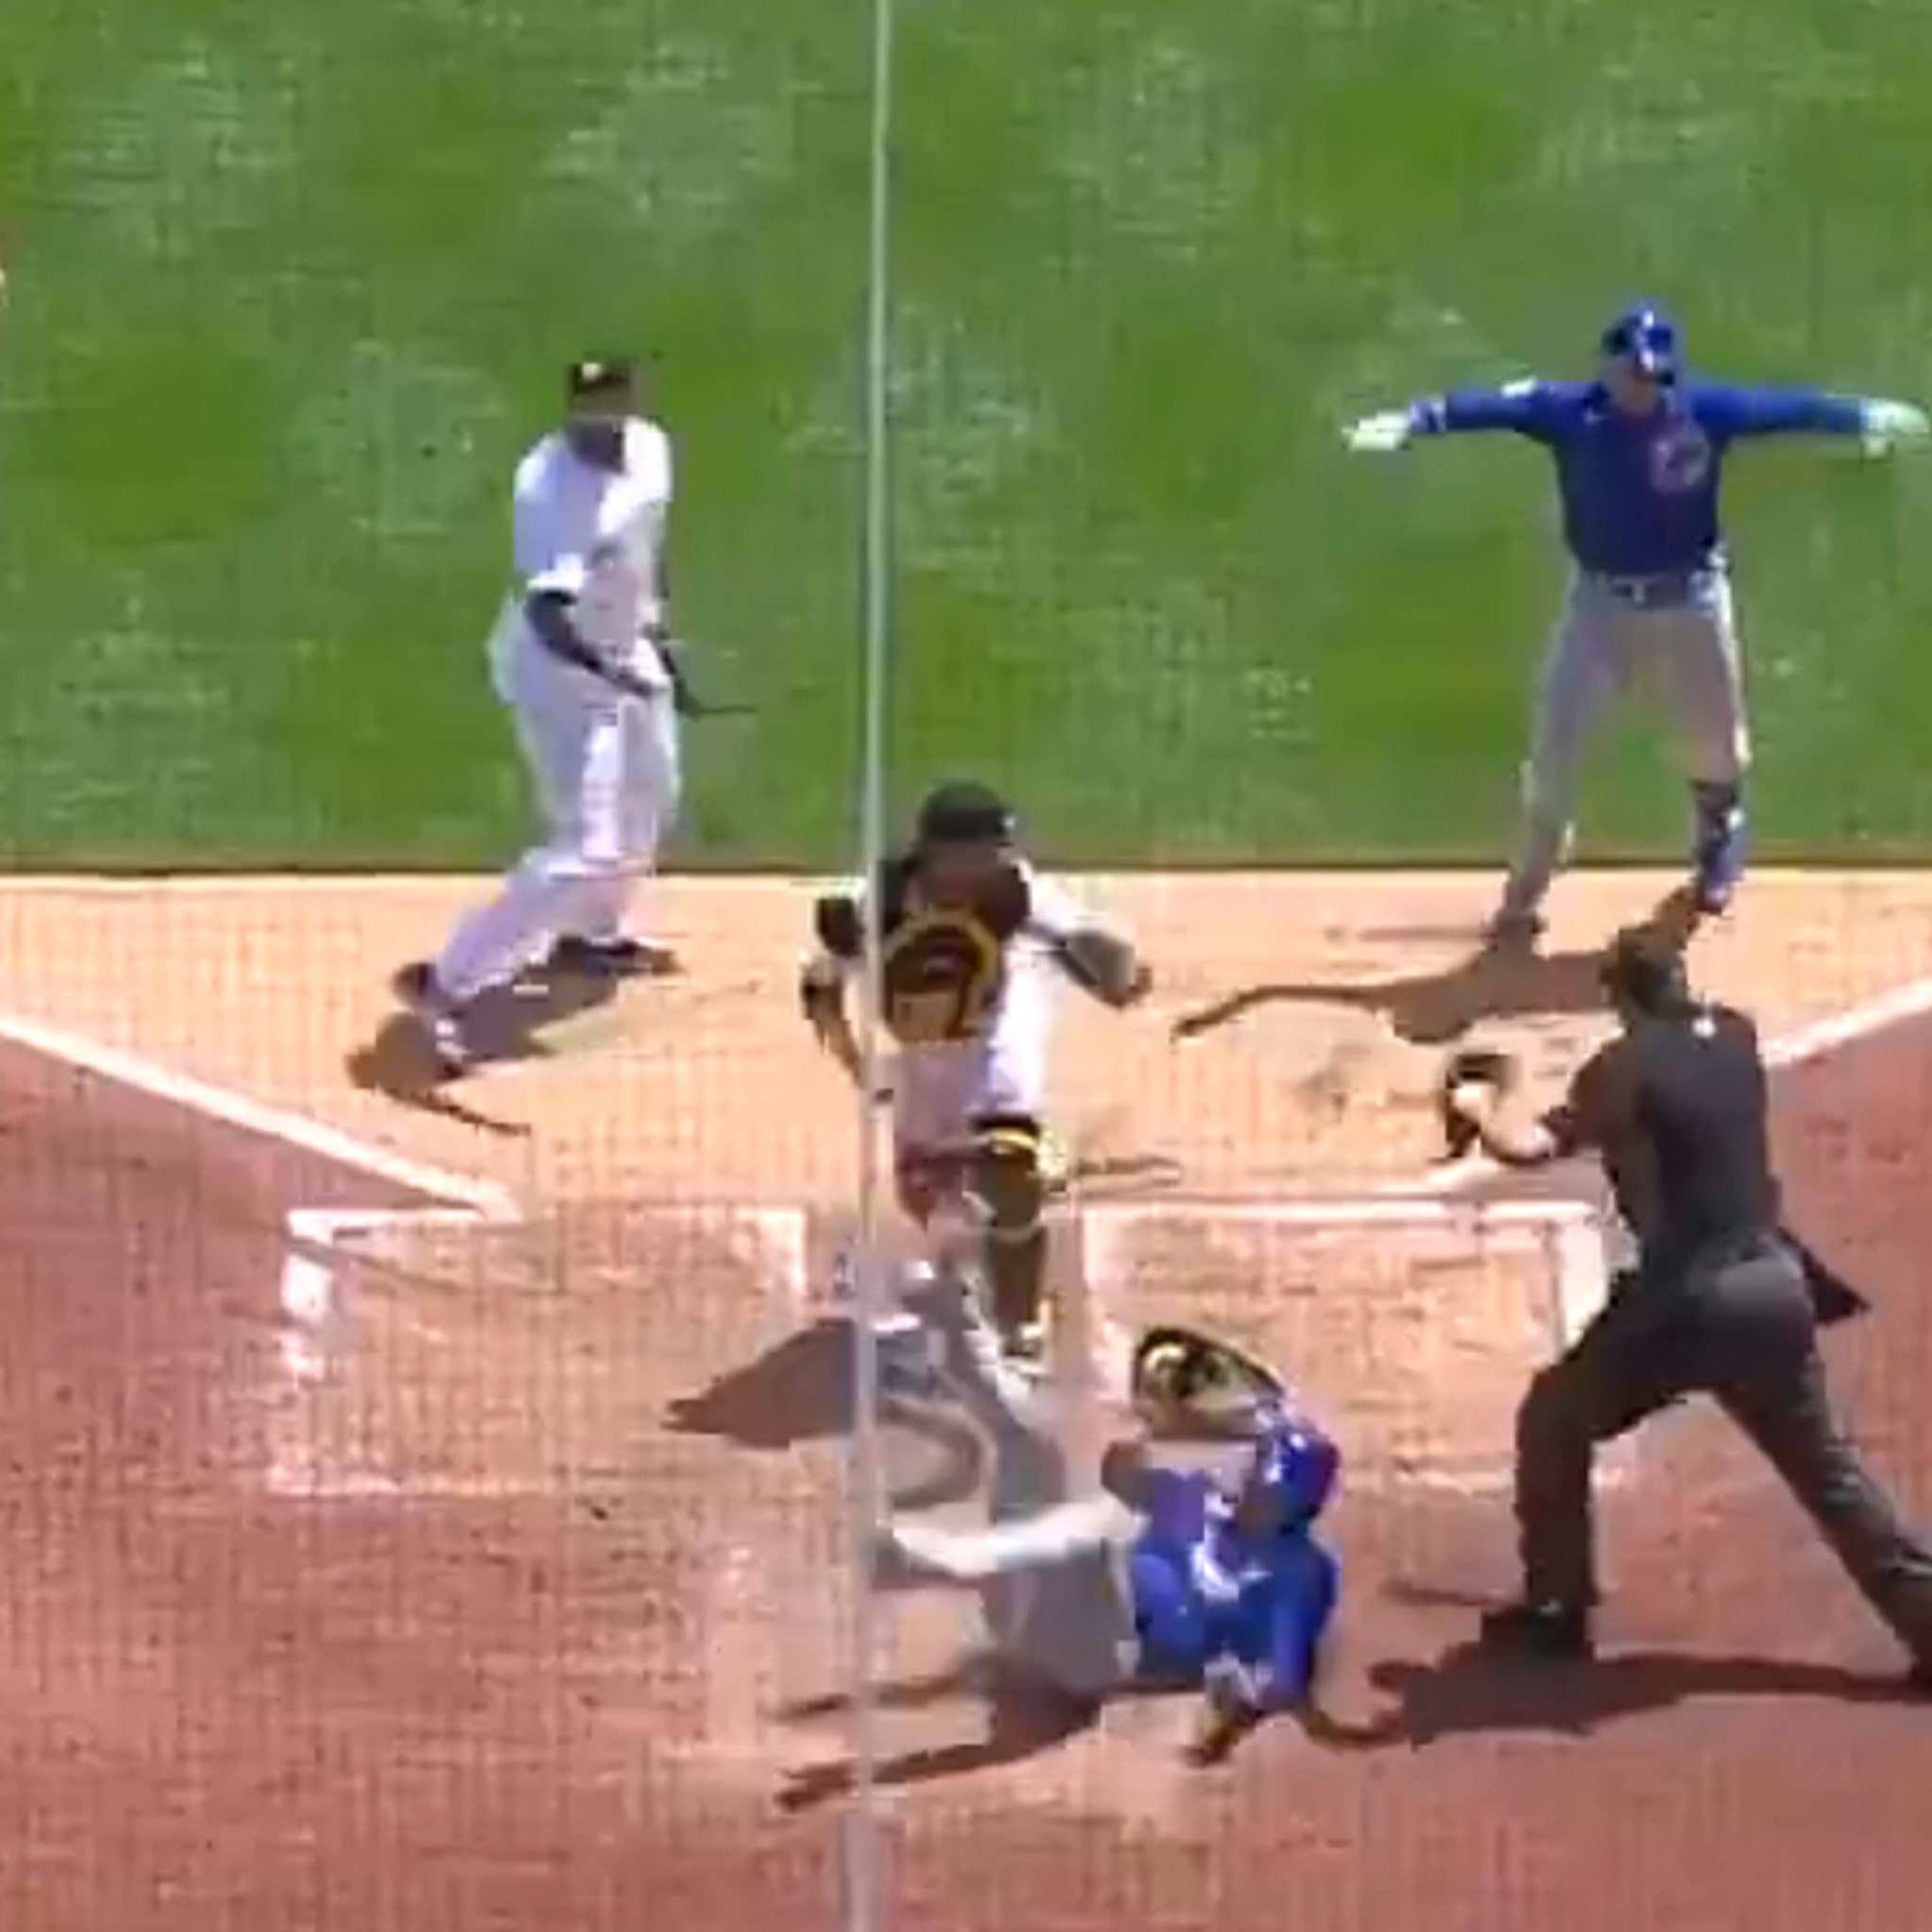 Watch: Cubs' Javier Baez makes insane dive for game-ending double